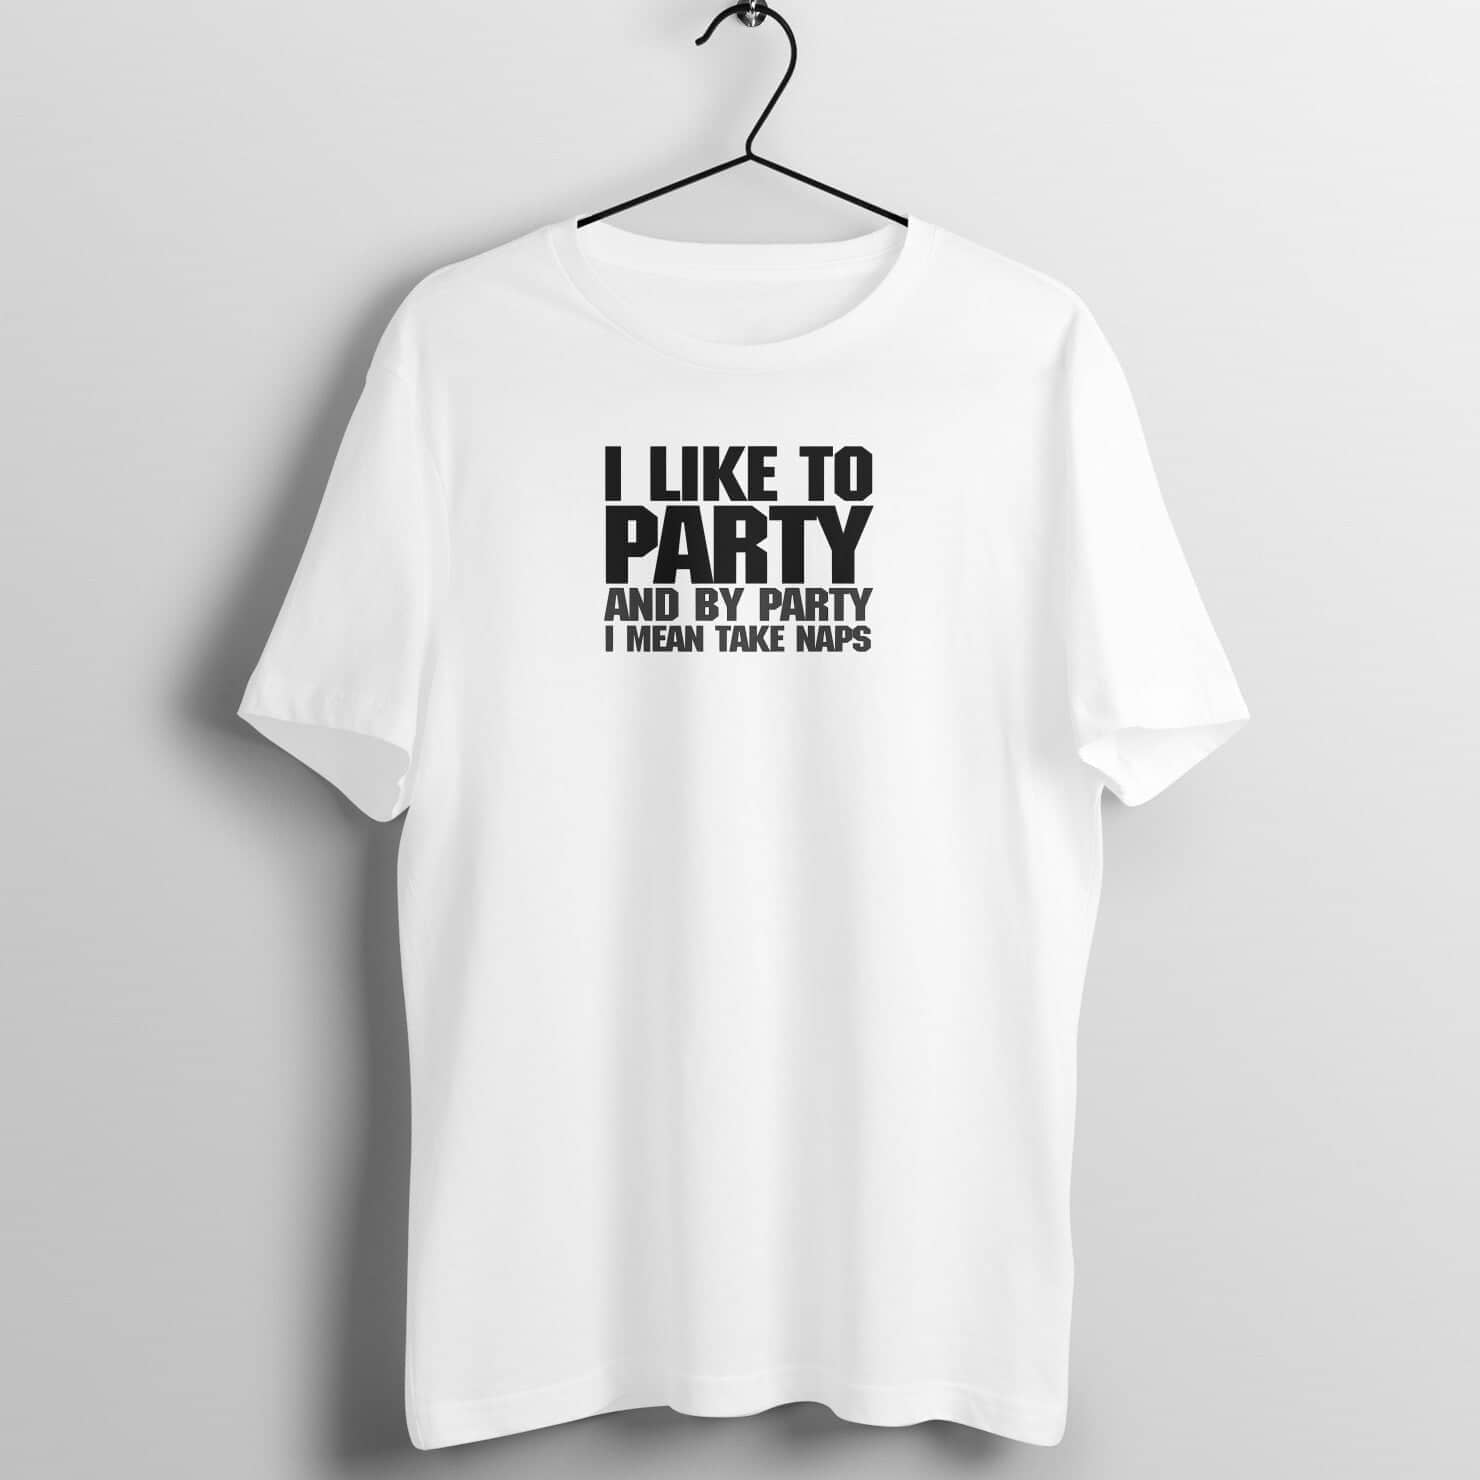 I Like to Party, By Party I mean Take Naps Funny White Sleepy T Shirt for Men and Women freeshipping - Catch My Drift India